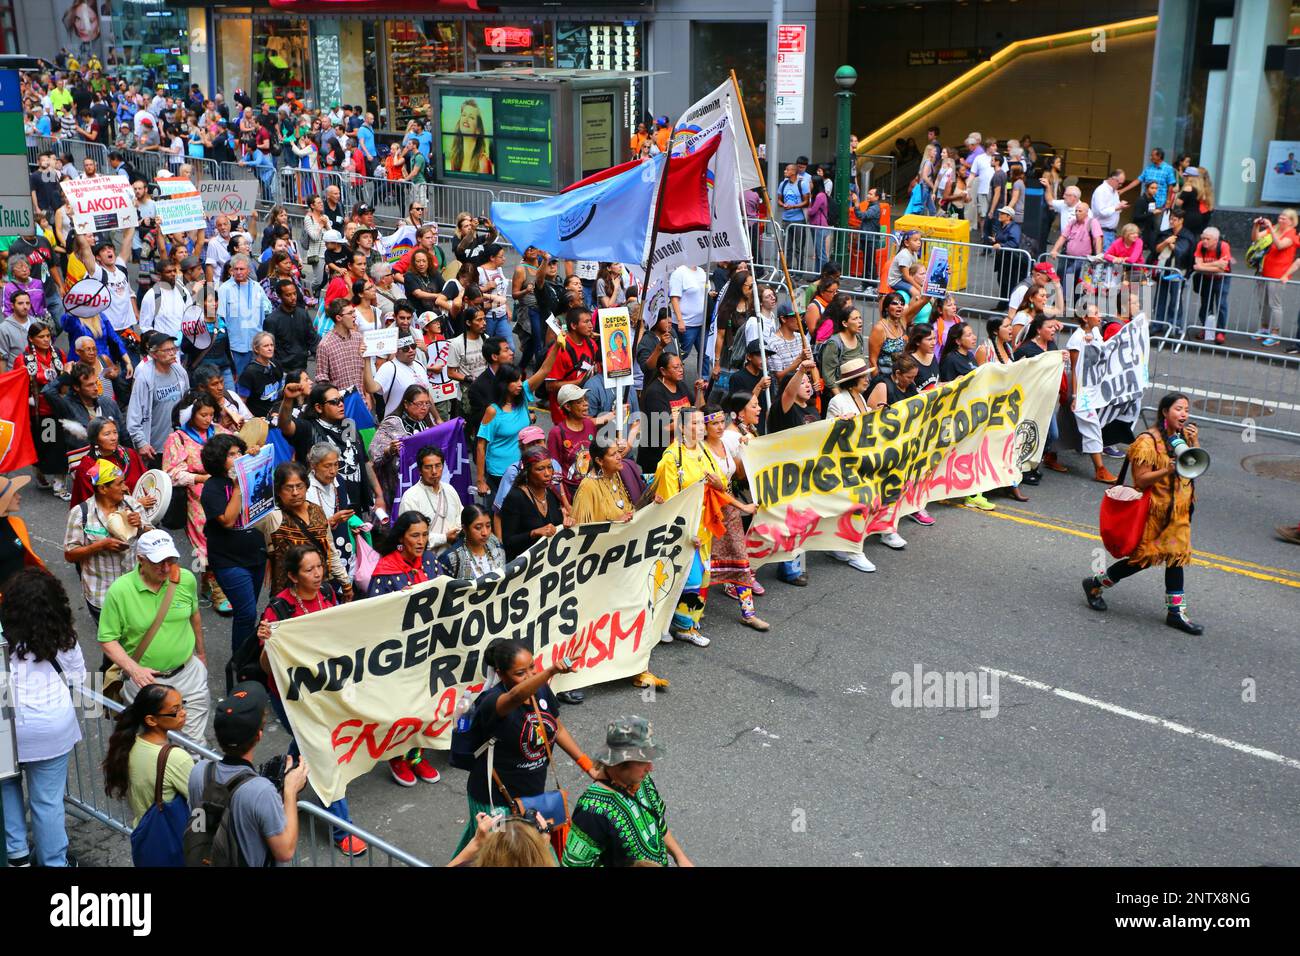 21 September 2014, New York. Indigenous Peoples Rights contingent in the People's Climate March with 'End Colonialism' banners Stock Photo